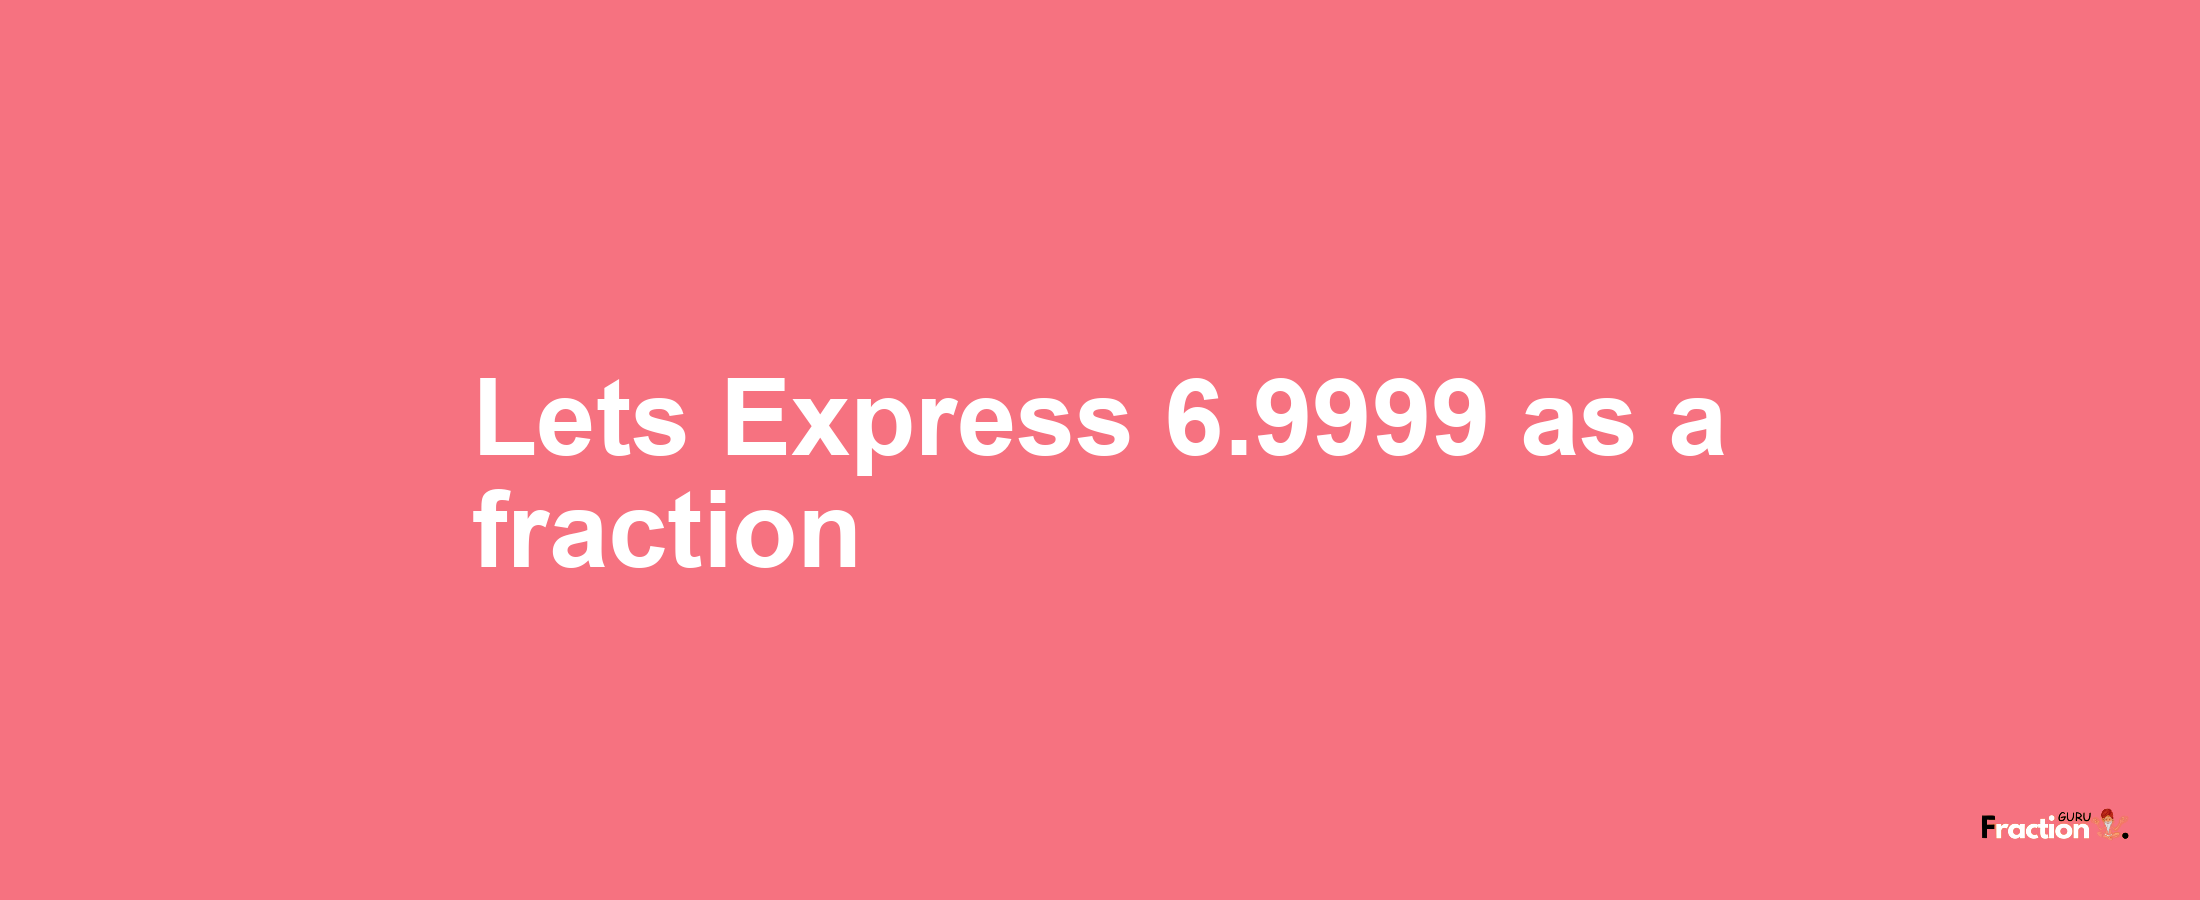 Lets Express 6.9999 as afraction